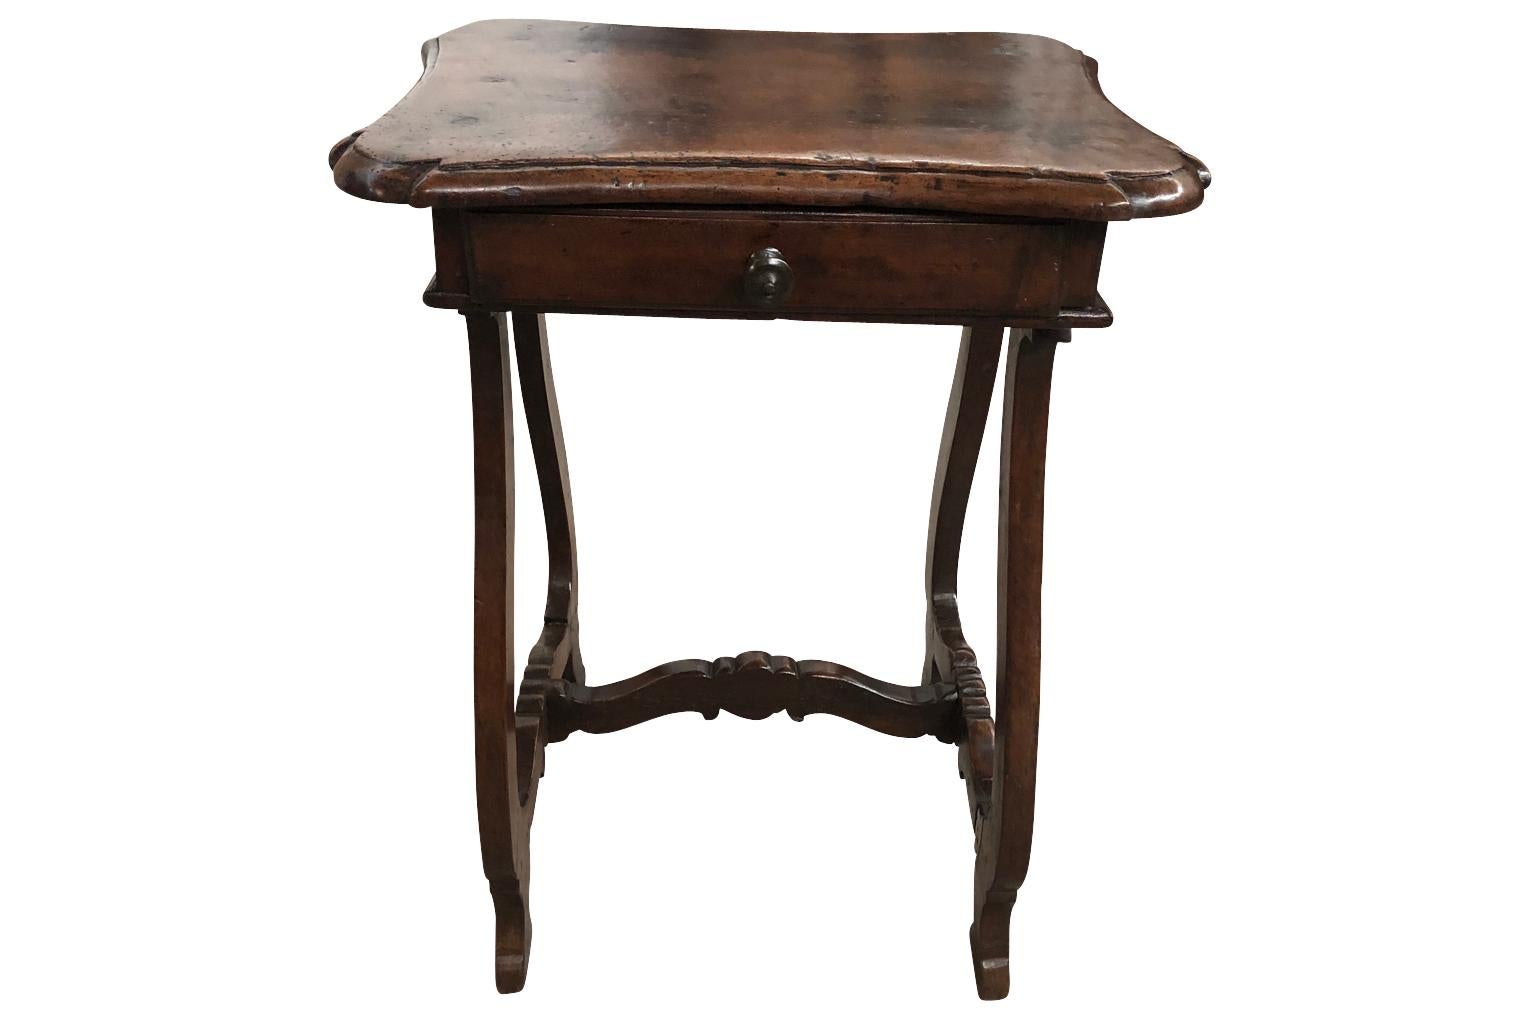 An exquisite 18th century Venetian side Table soundly constructed from stunning walnut. The table has a beautiful edge finish to the top, a single drawer and lovely lyre shaped legs. Outstanding patina - warm and luminous.